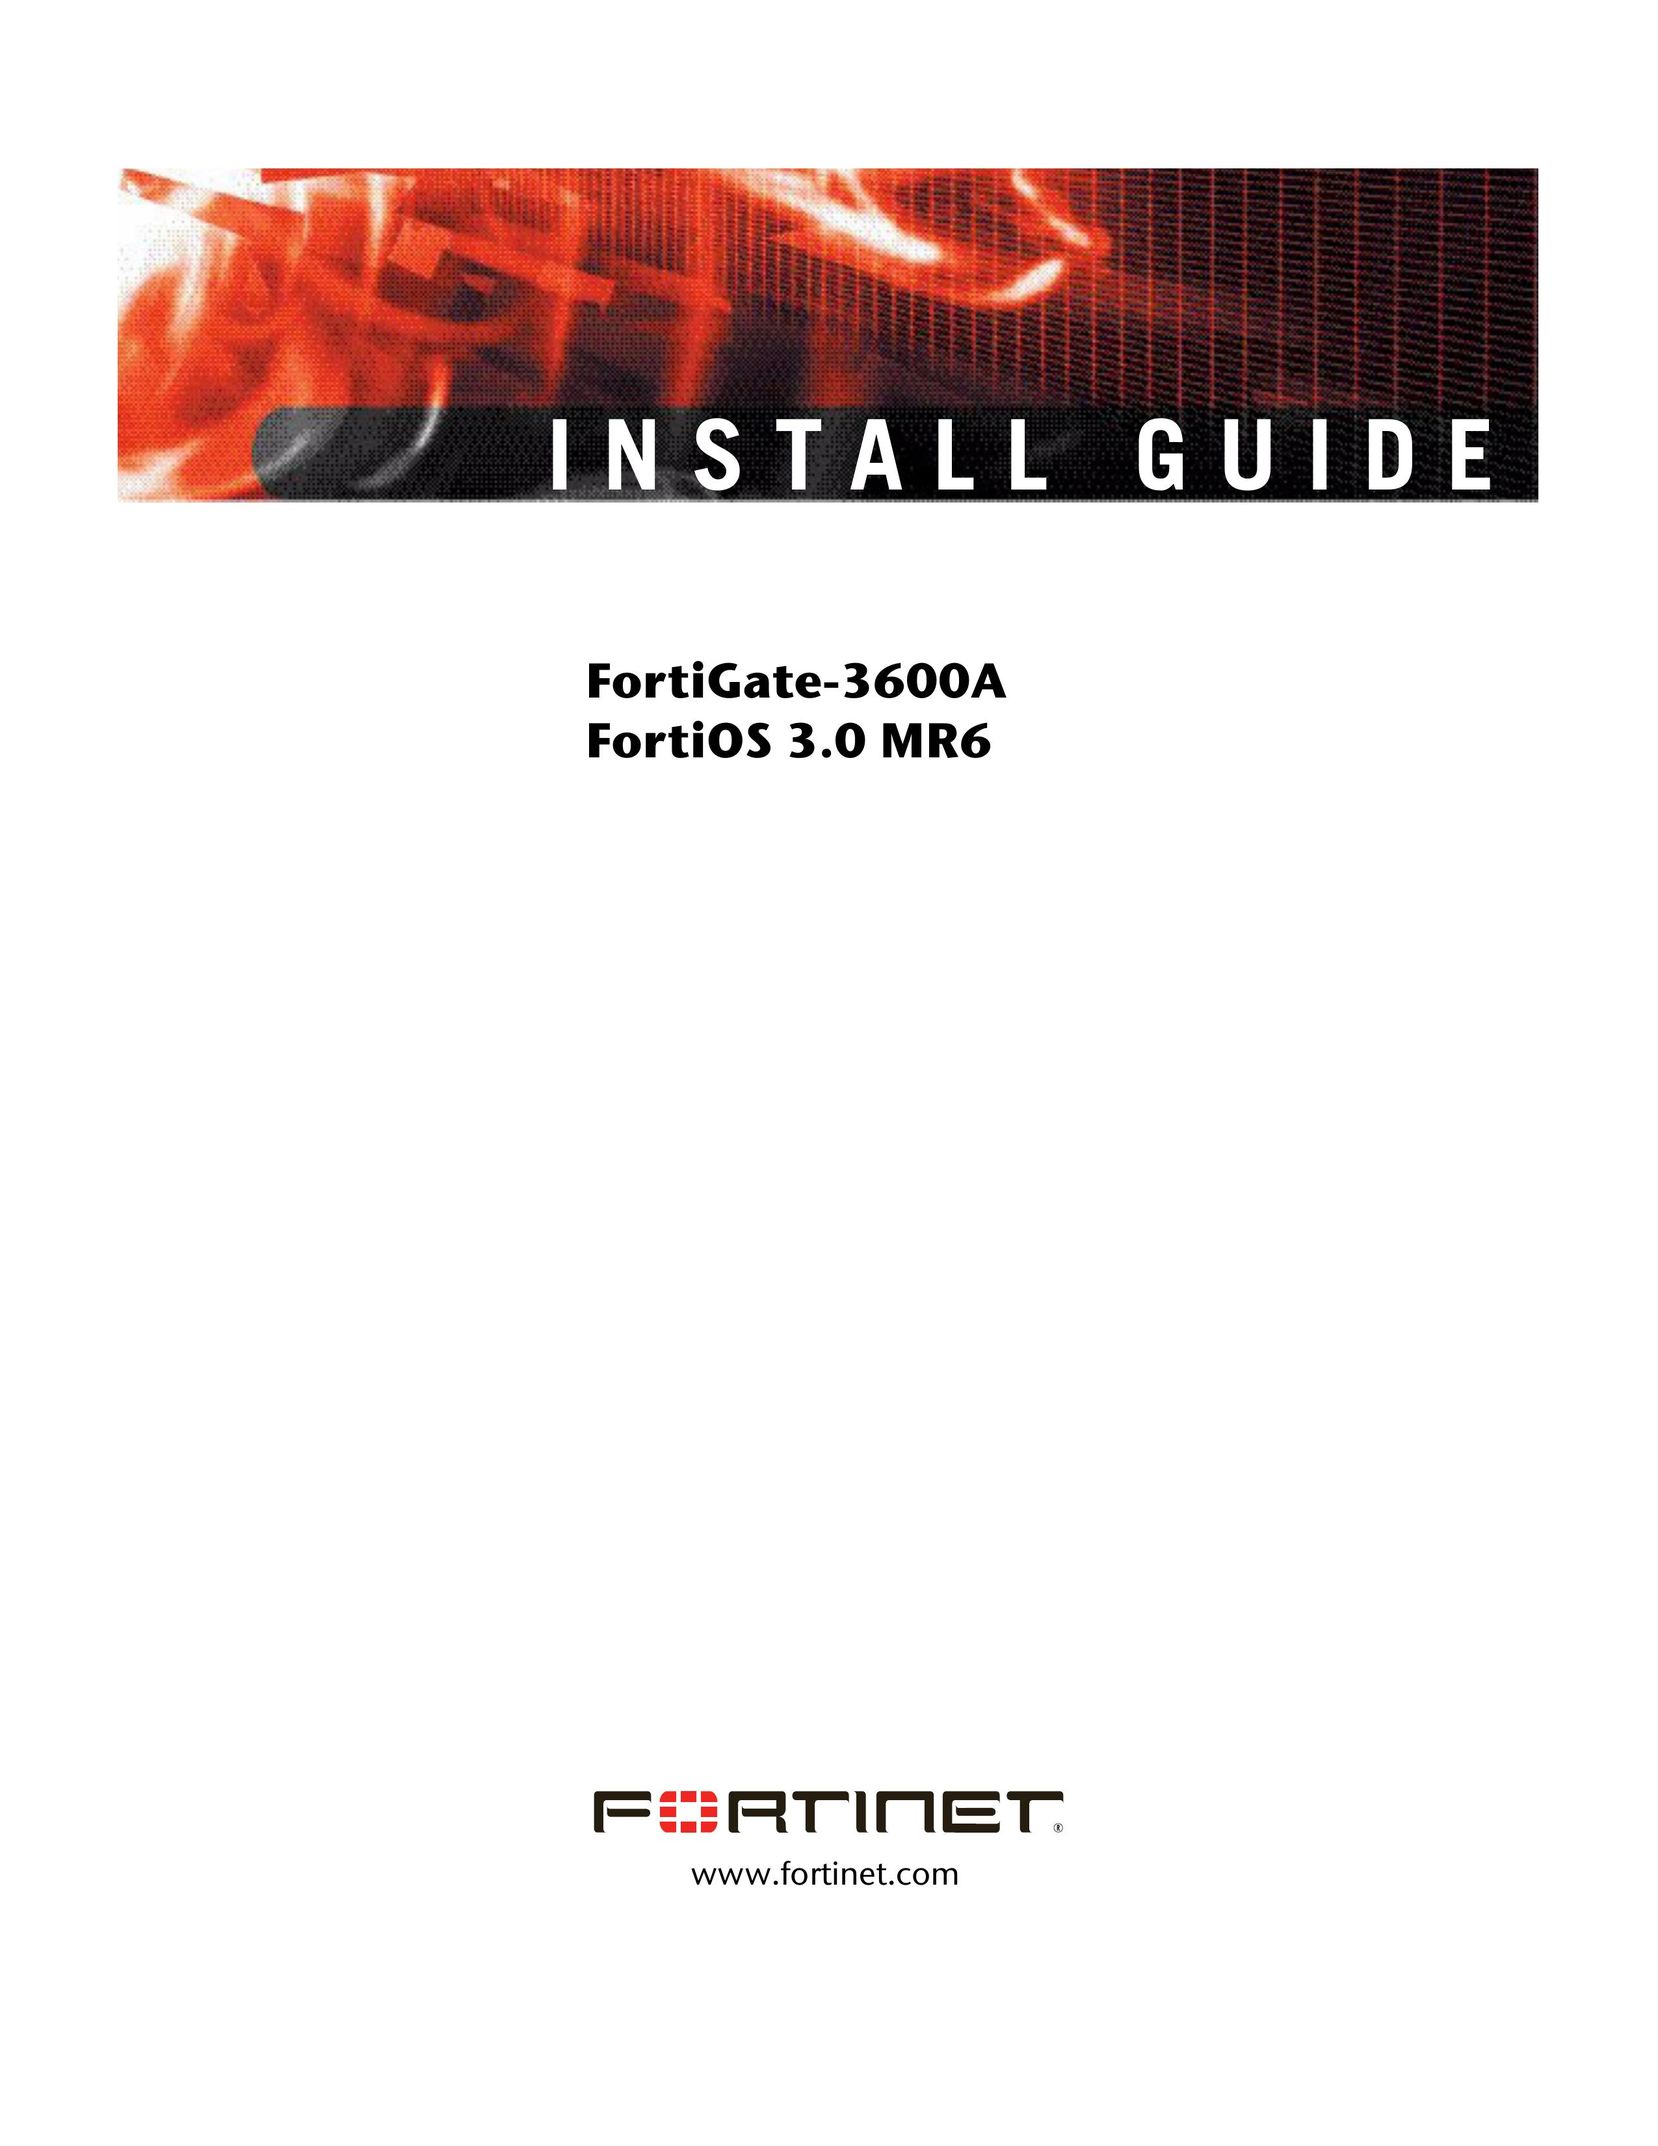 Fortinet 3600A Network Card User Manual